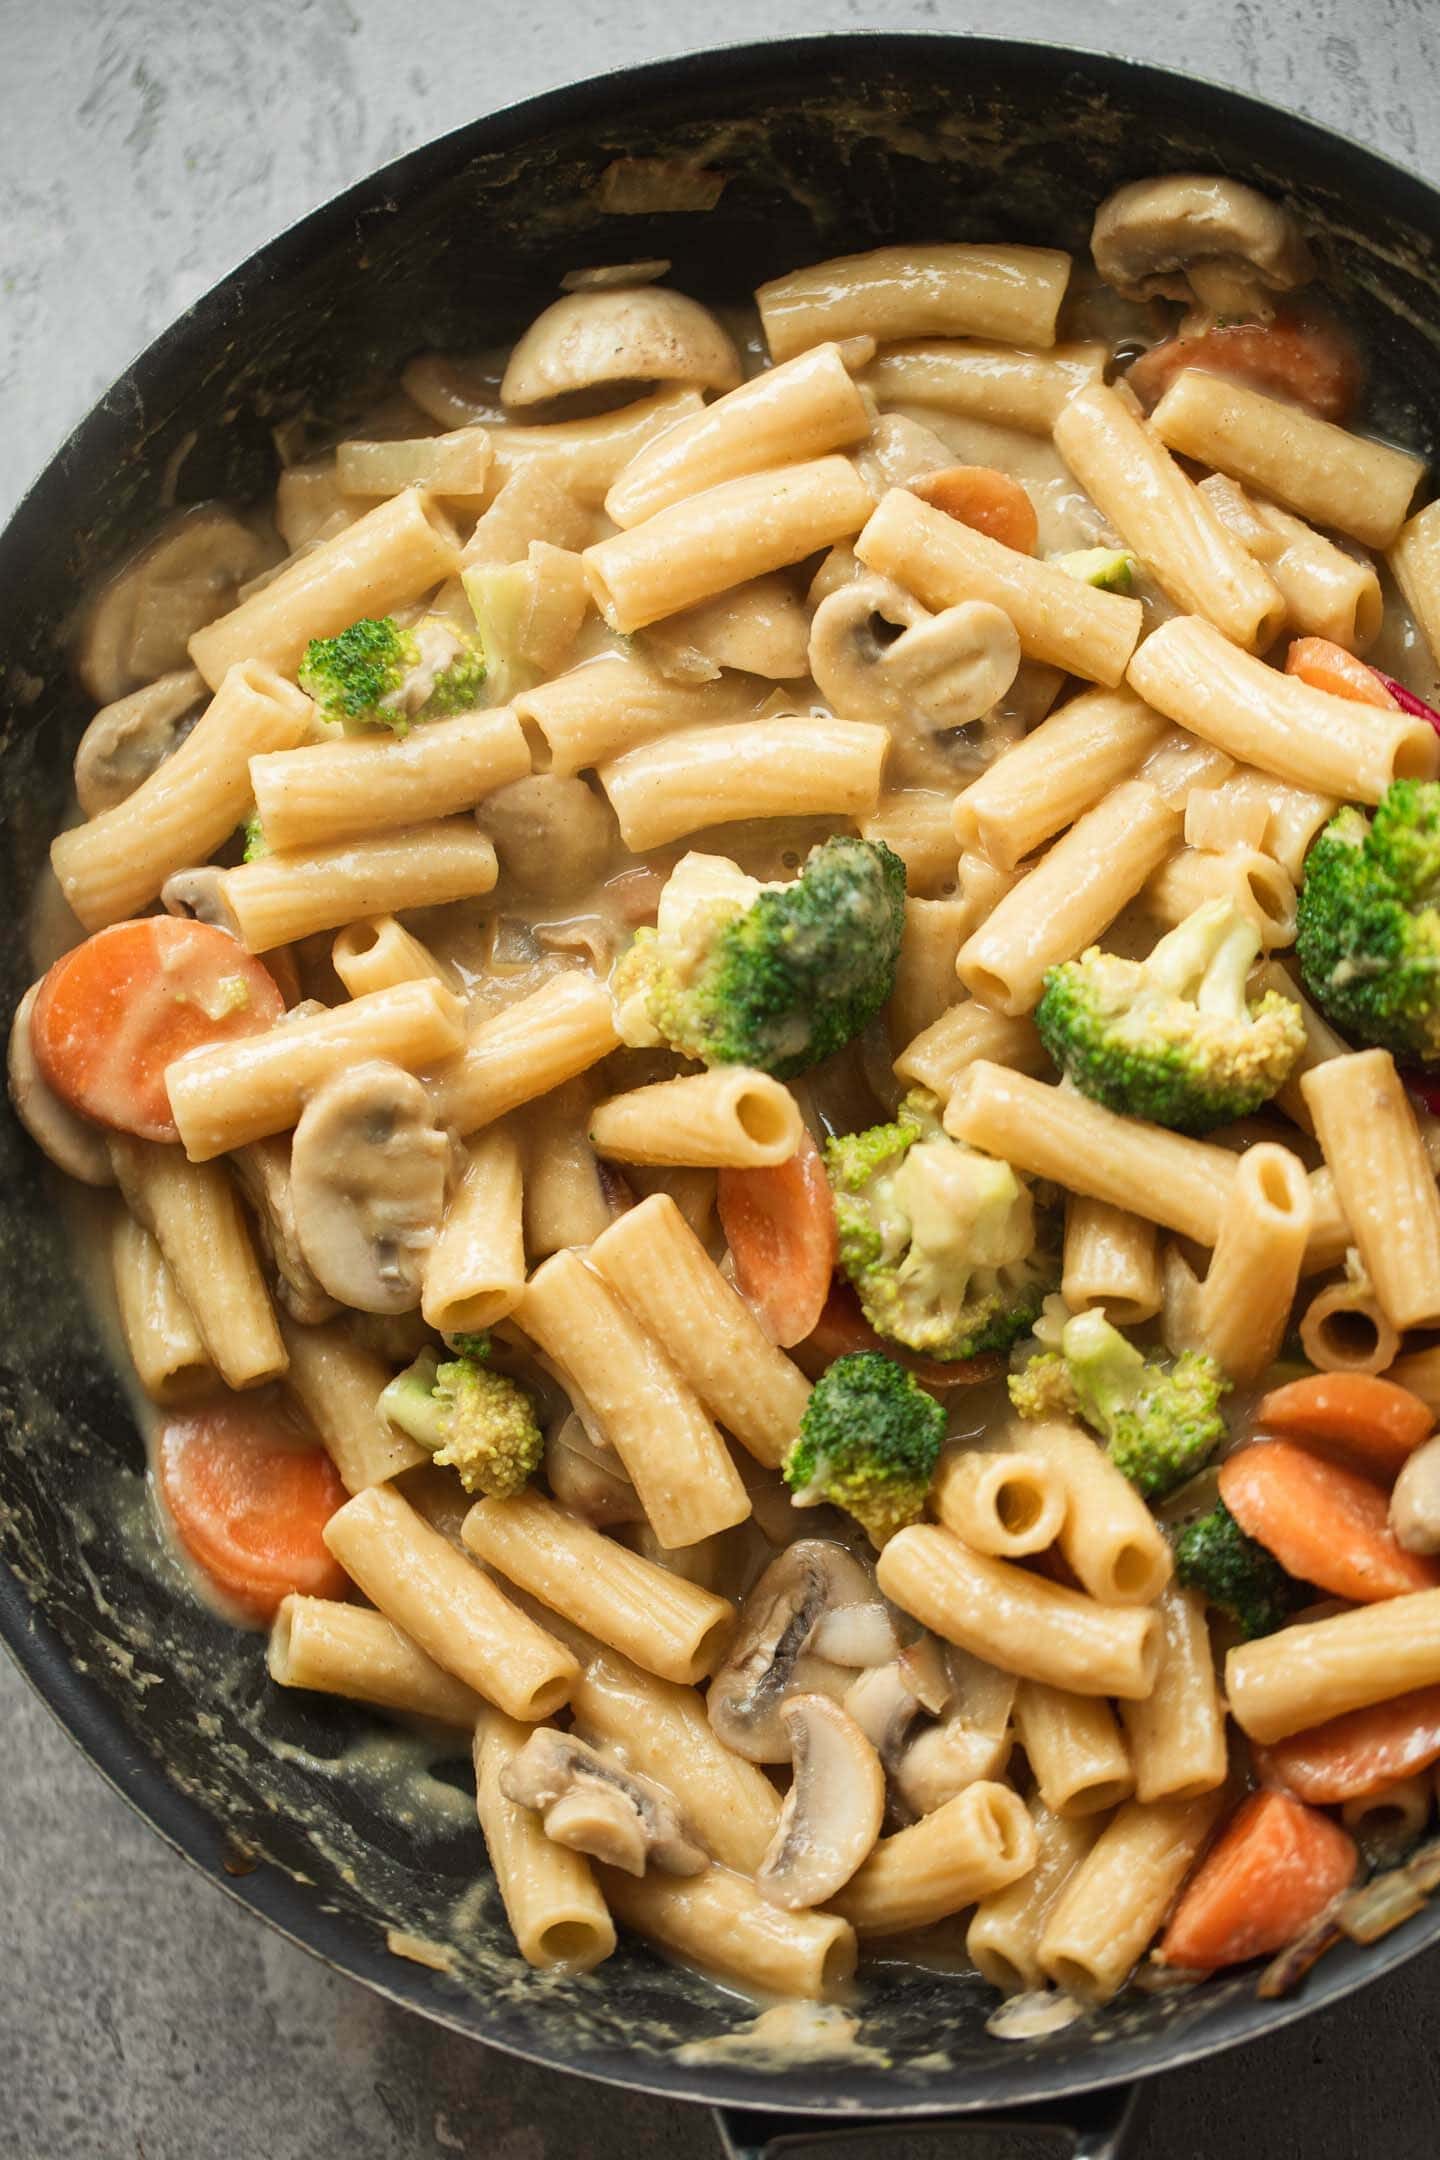 Vegetables, pasta and a creamy sauce in a frying pan